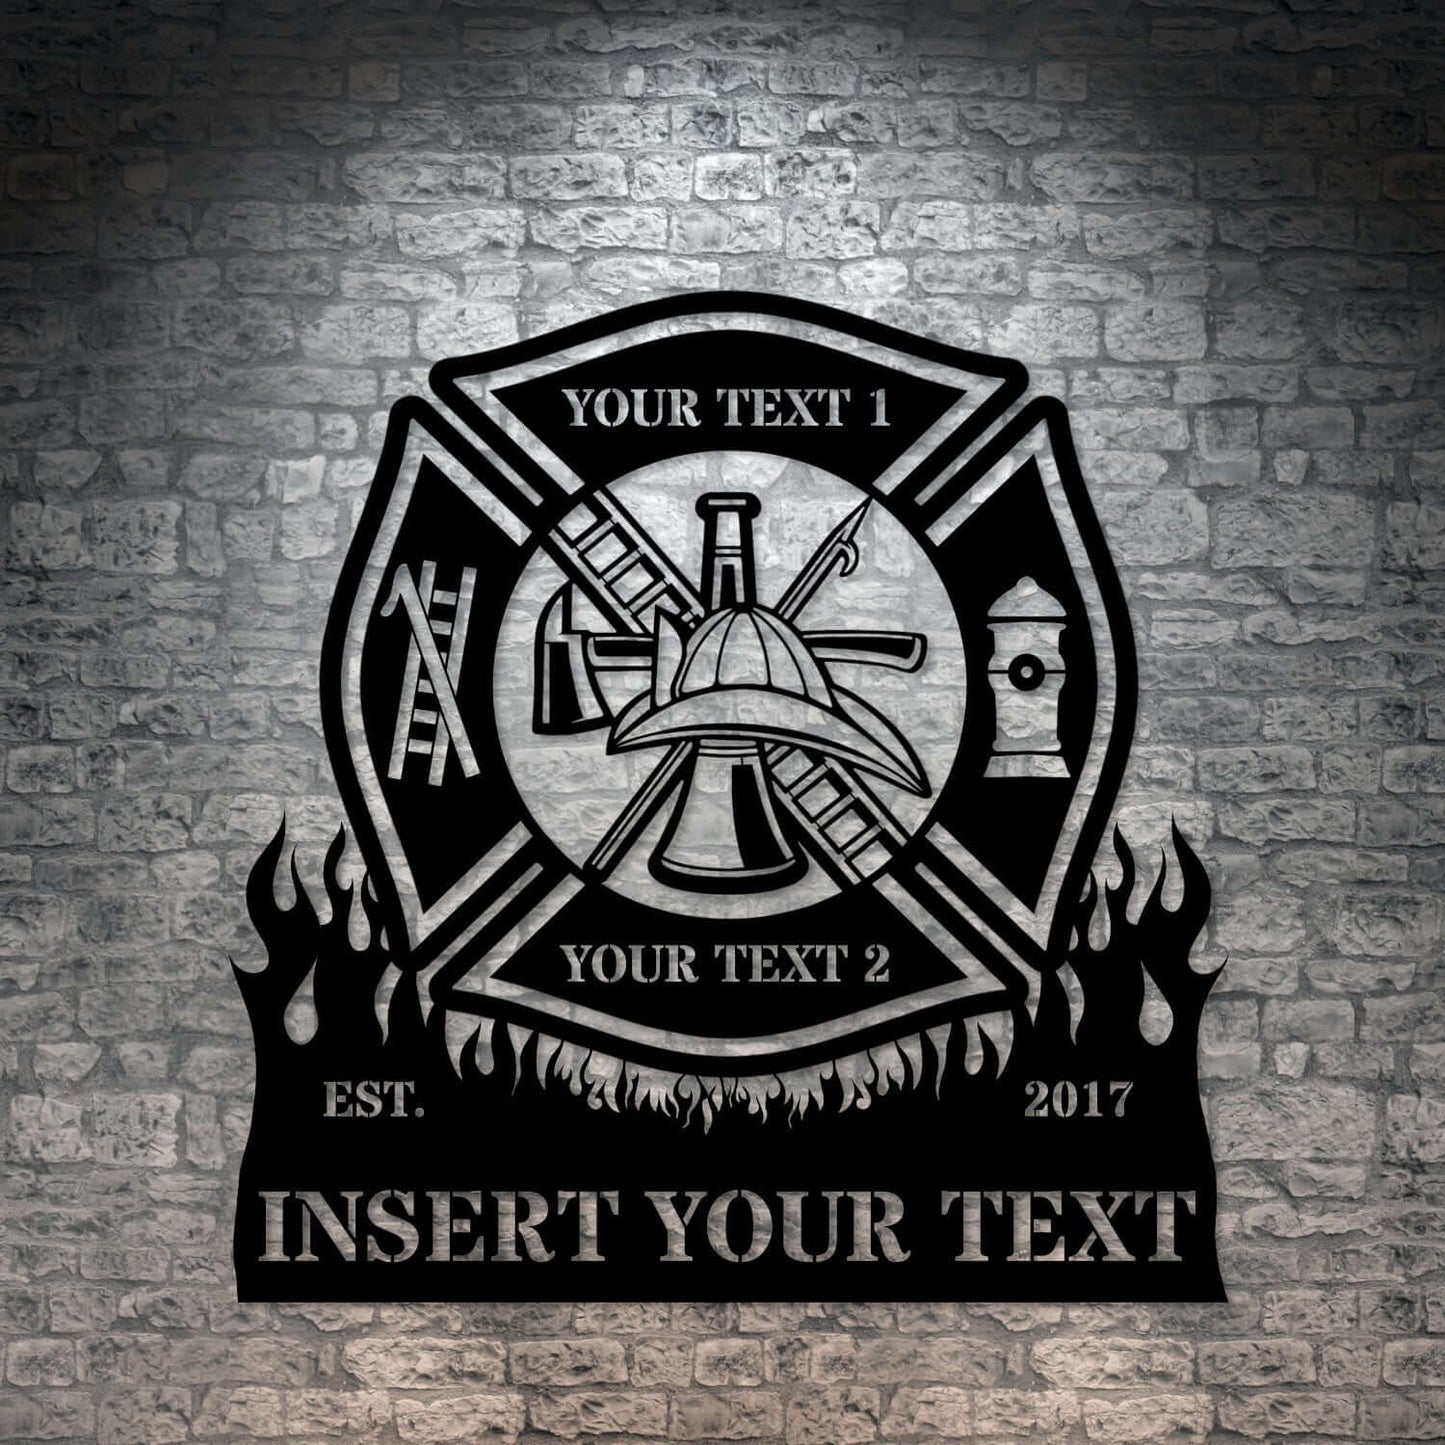 Firefighter Personalized Metal Sign Gift. Custom Fire Department Maltese Cross Wall Decor. Customized Name Sign For US Fireman. Fire Chief